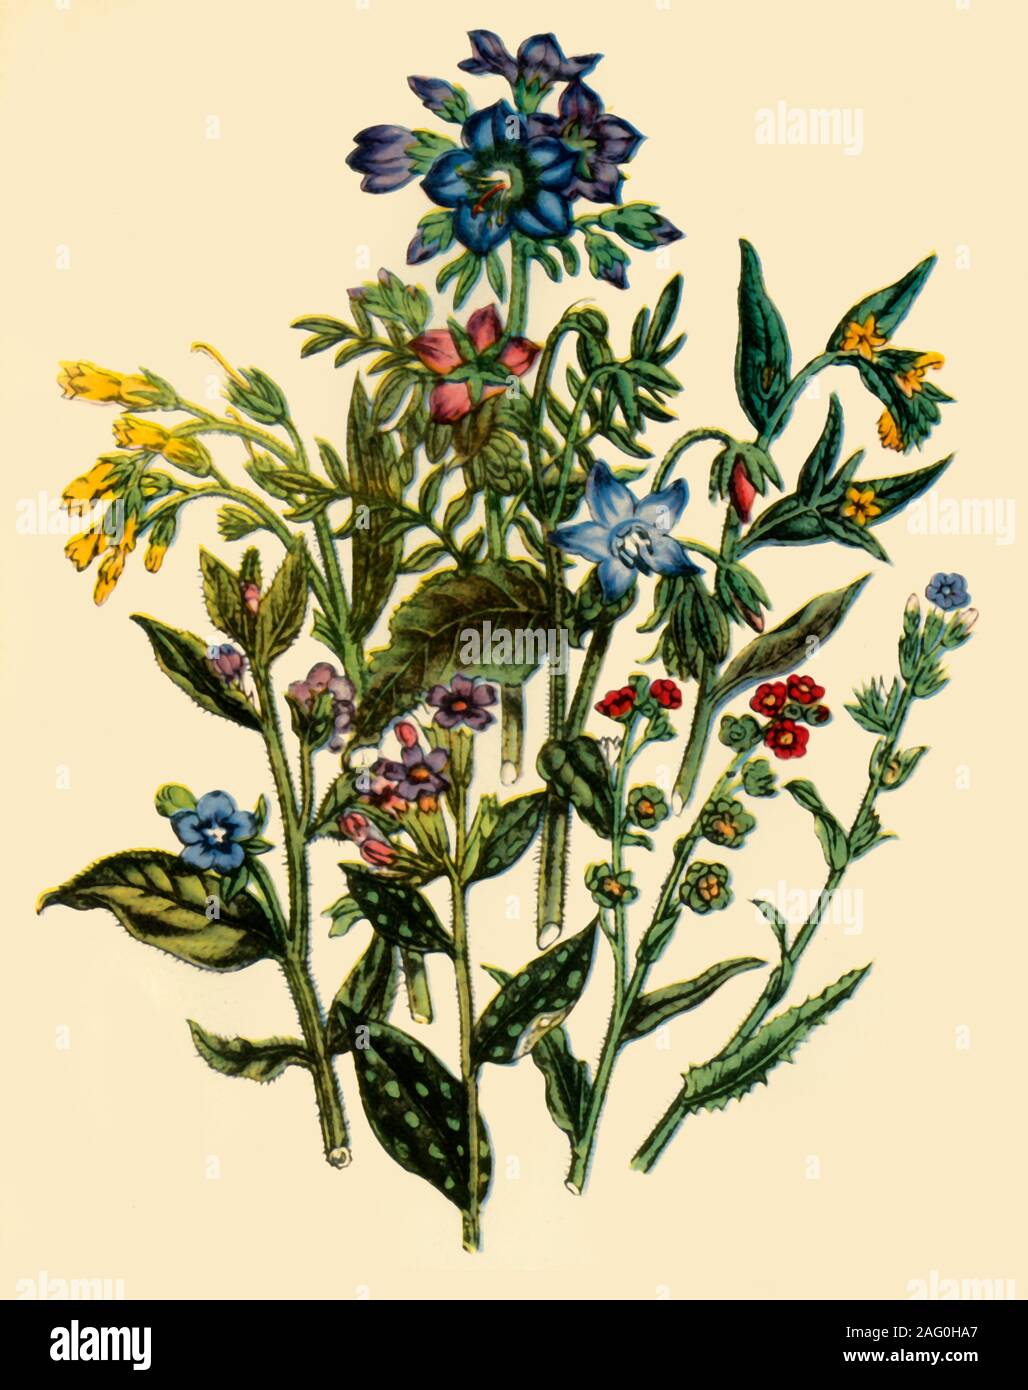 Variations on a Theme: Forget-me-not, Heartleaf or Green Alkanet